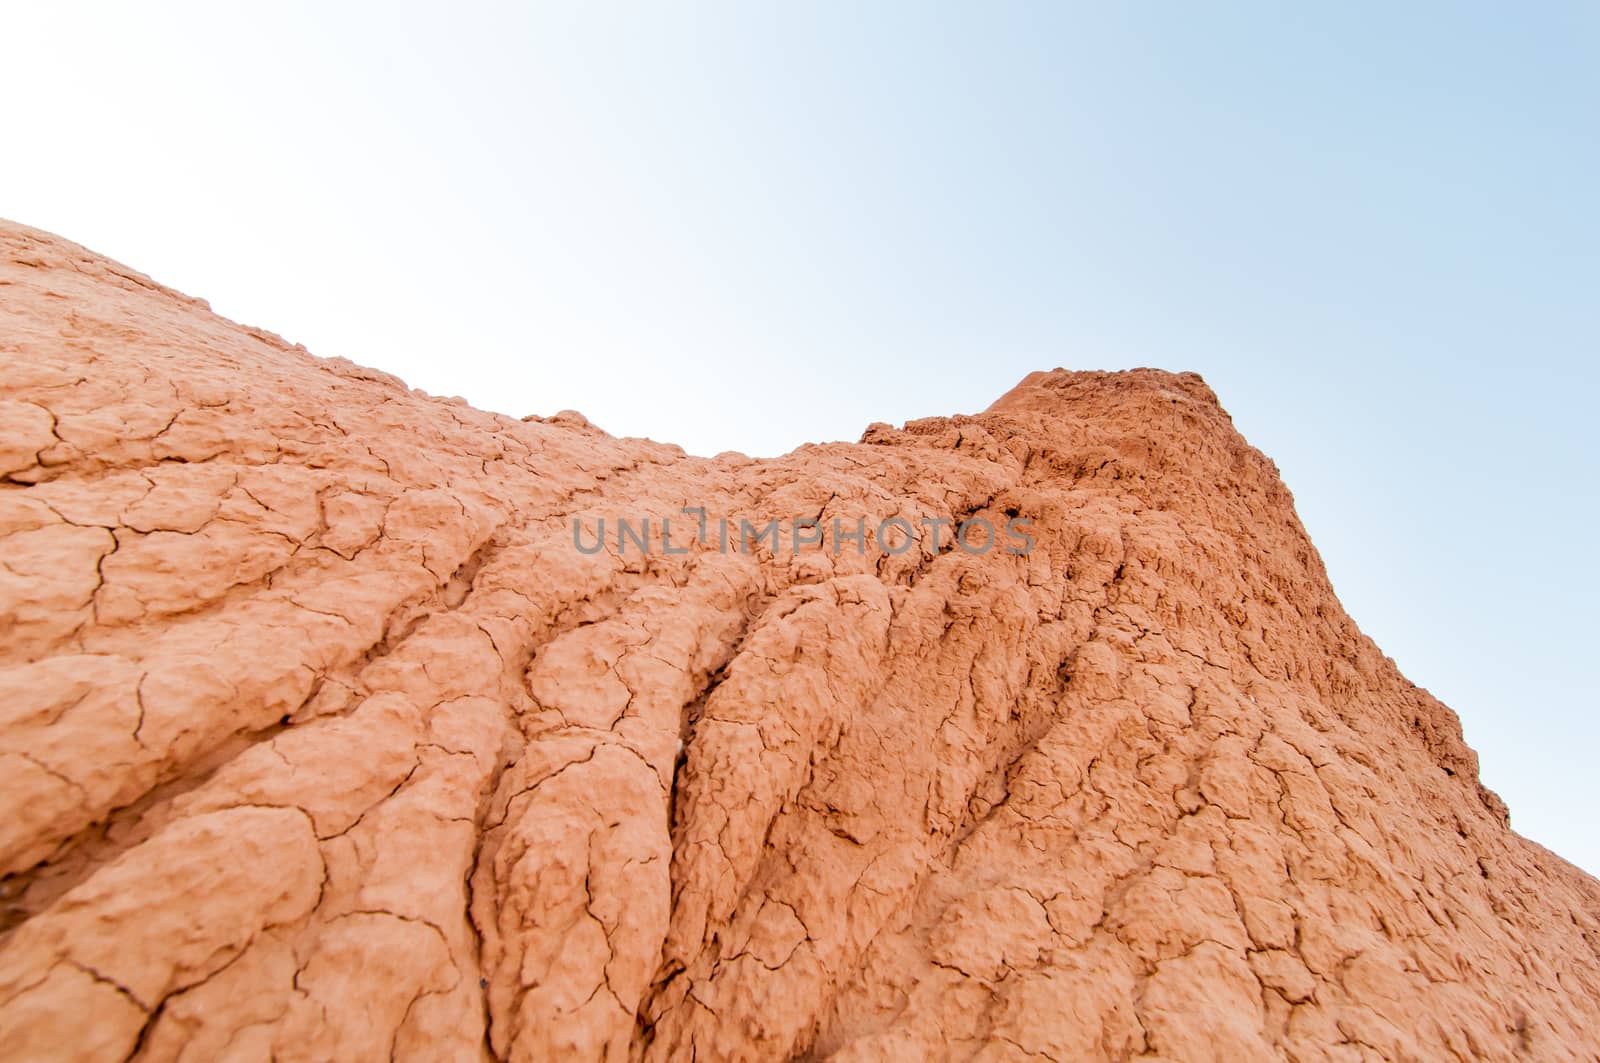 Steep angle viewing a rock face in southern Utah